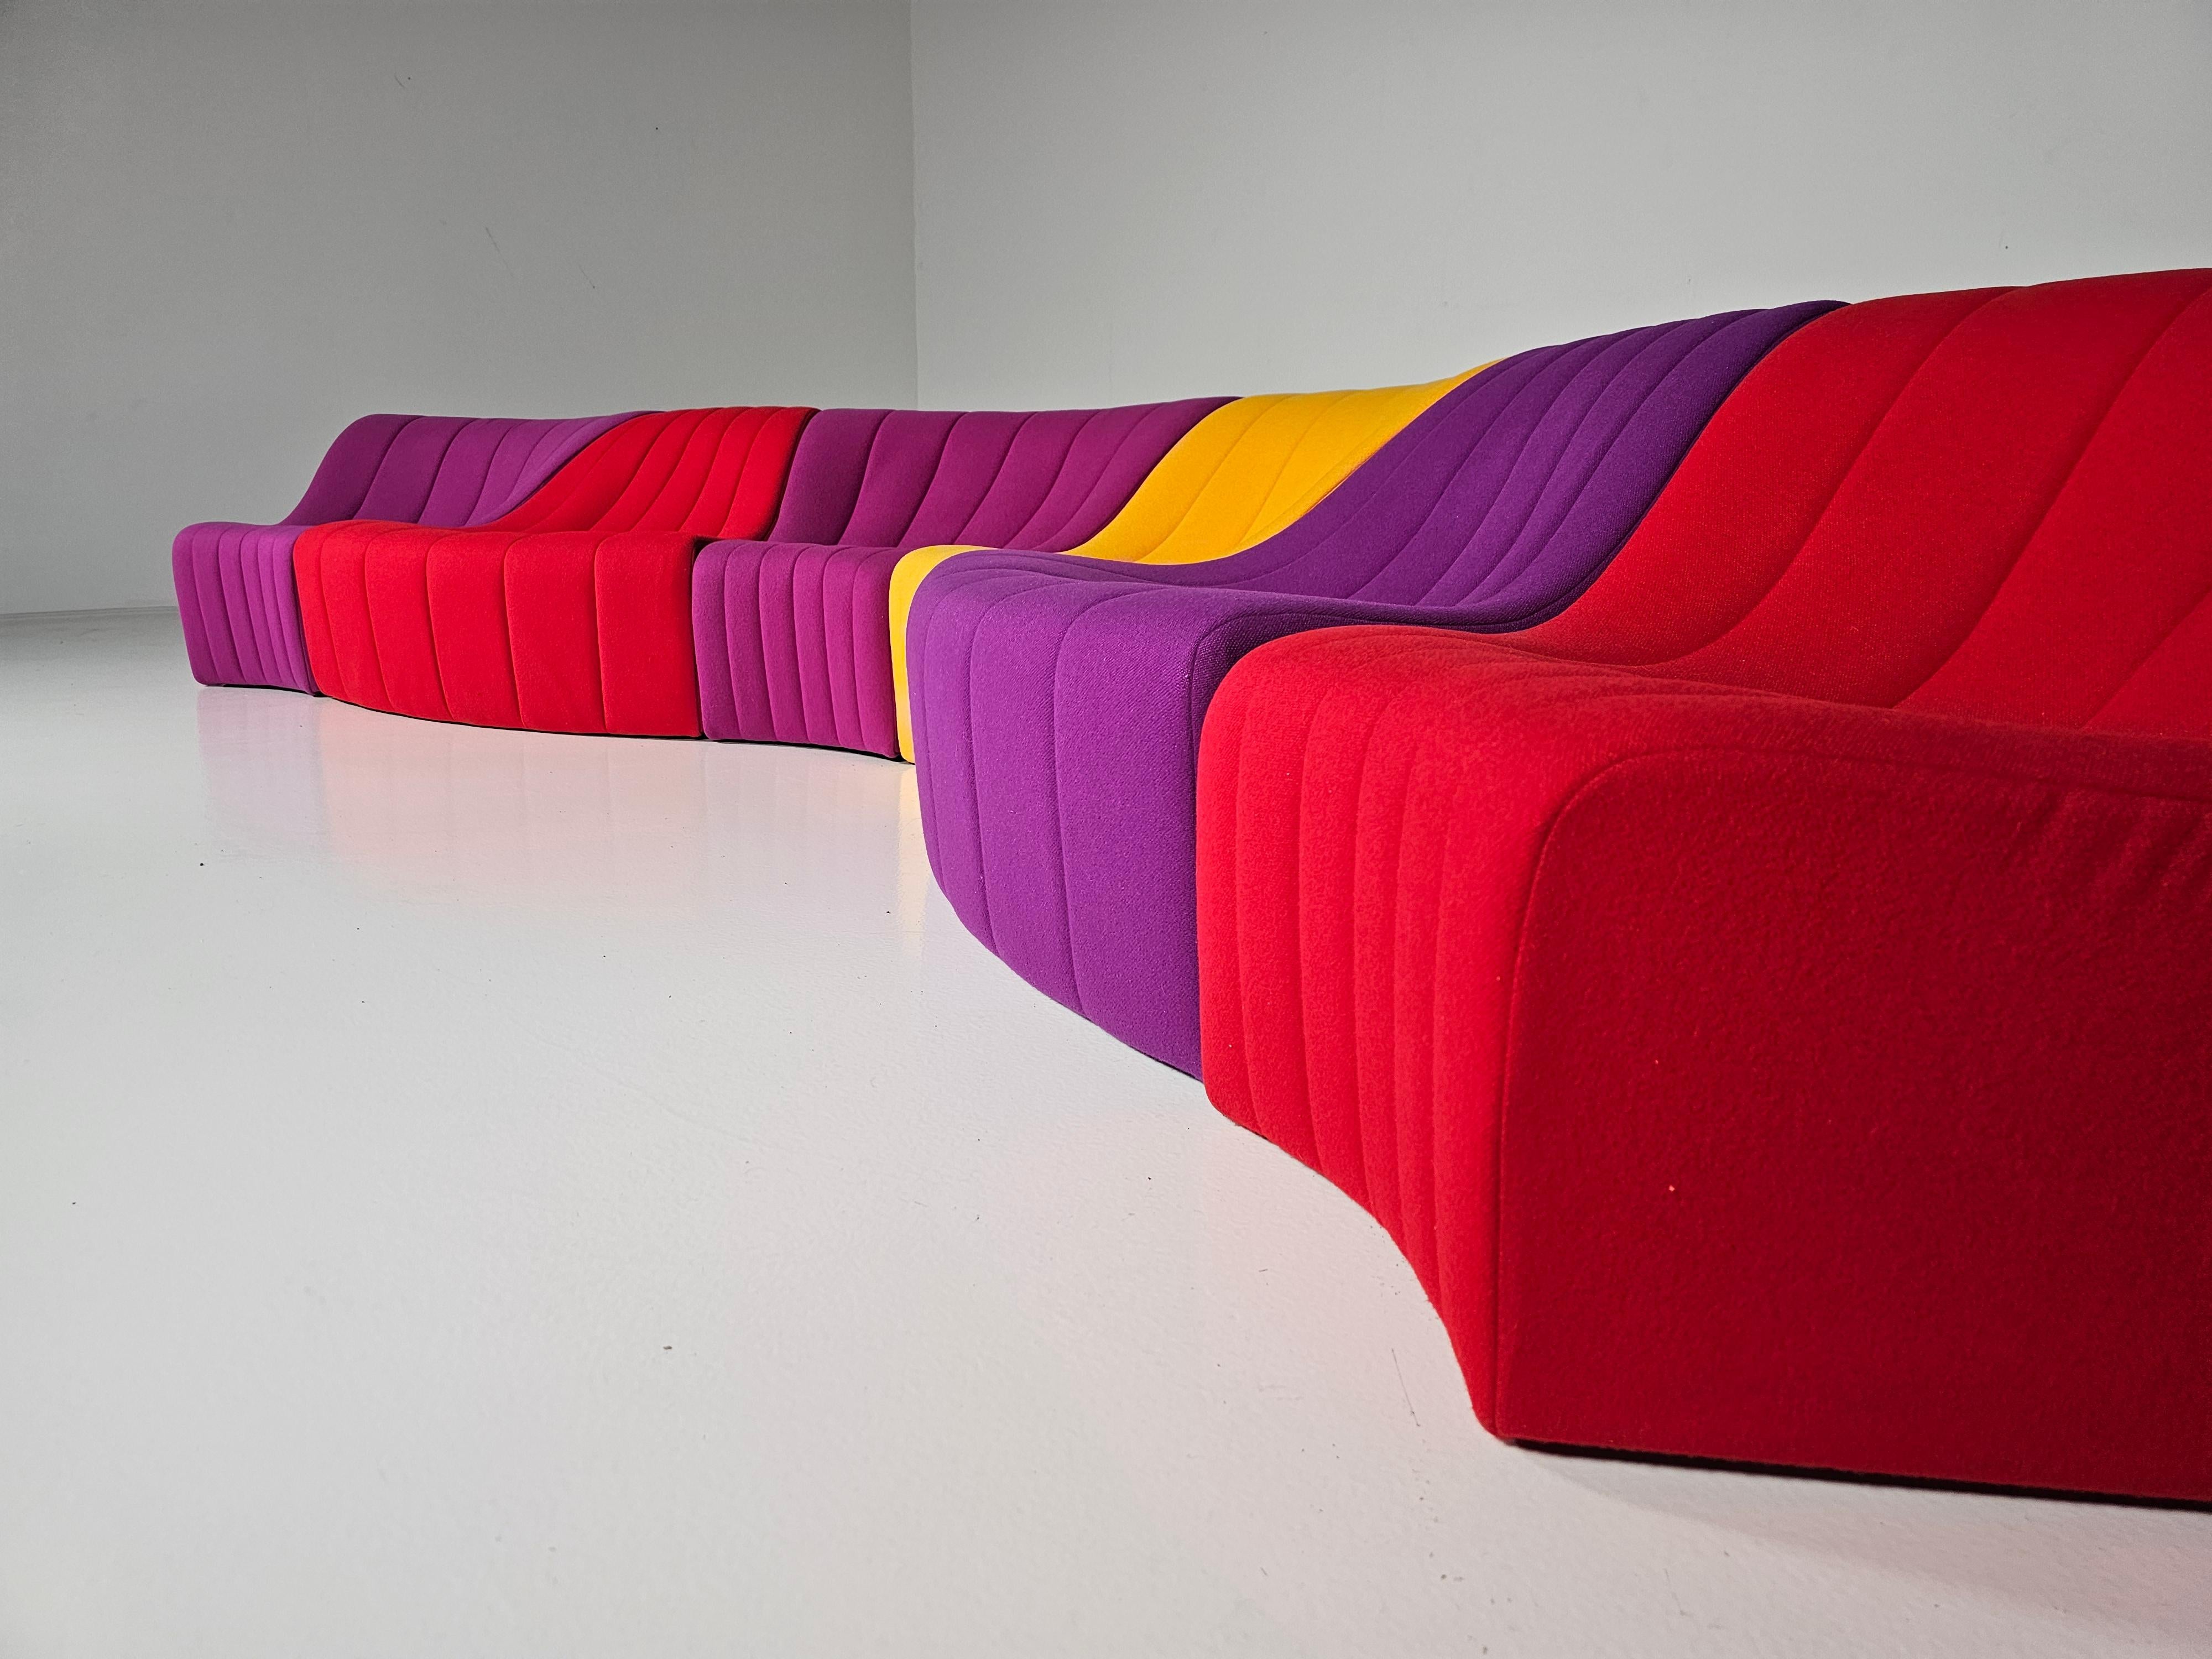 Kwok Hoi Chan 'Chromatic'  modular sofa in red, purple and yellow colors  3